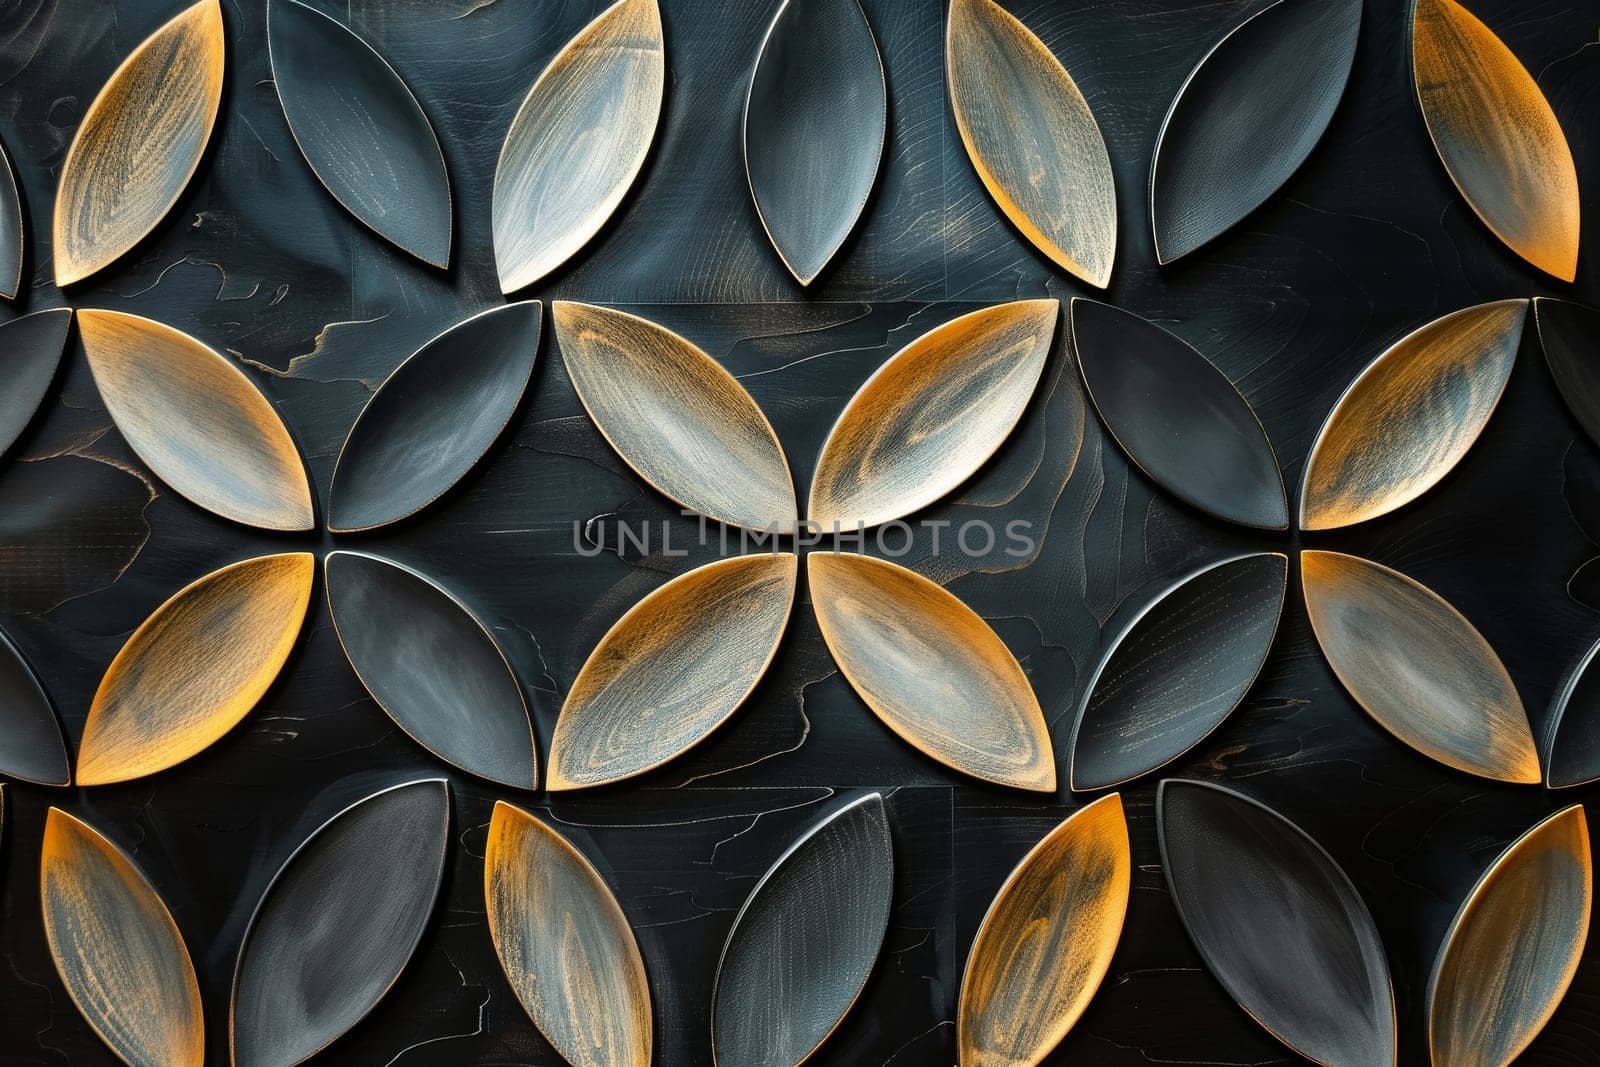 A black and gold design of flower shapes by itchaznong